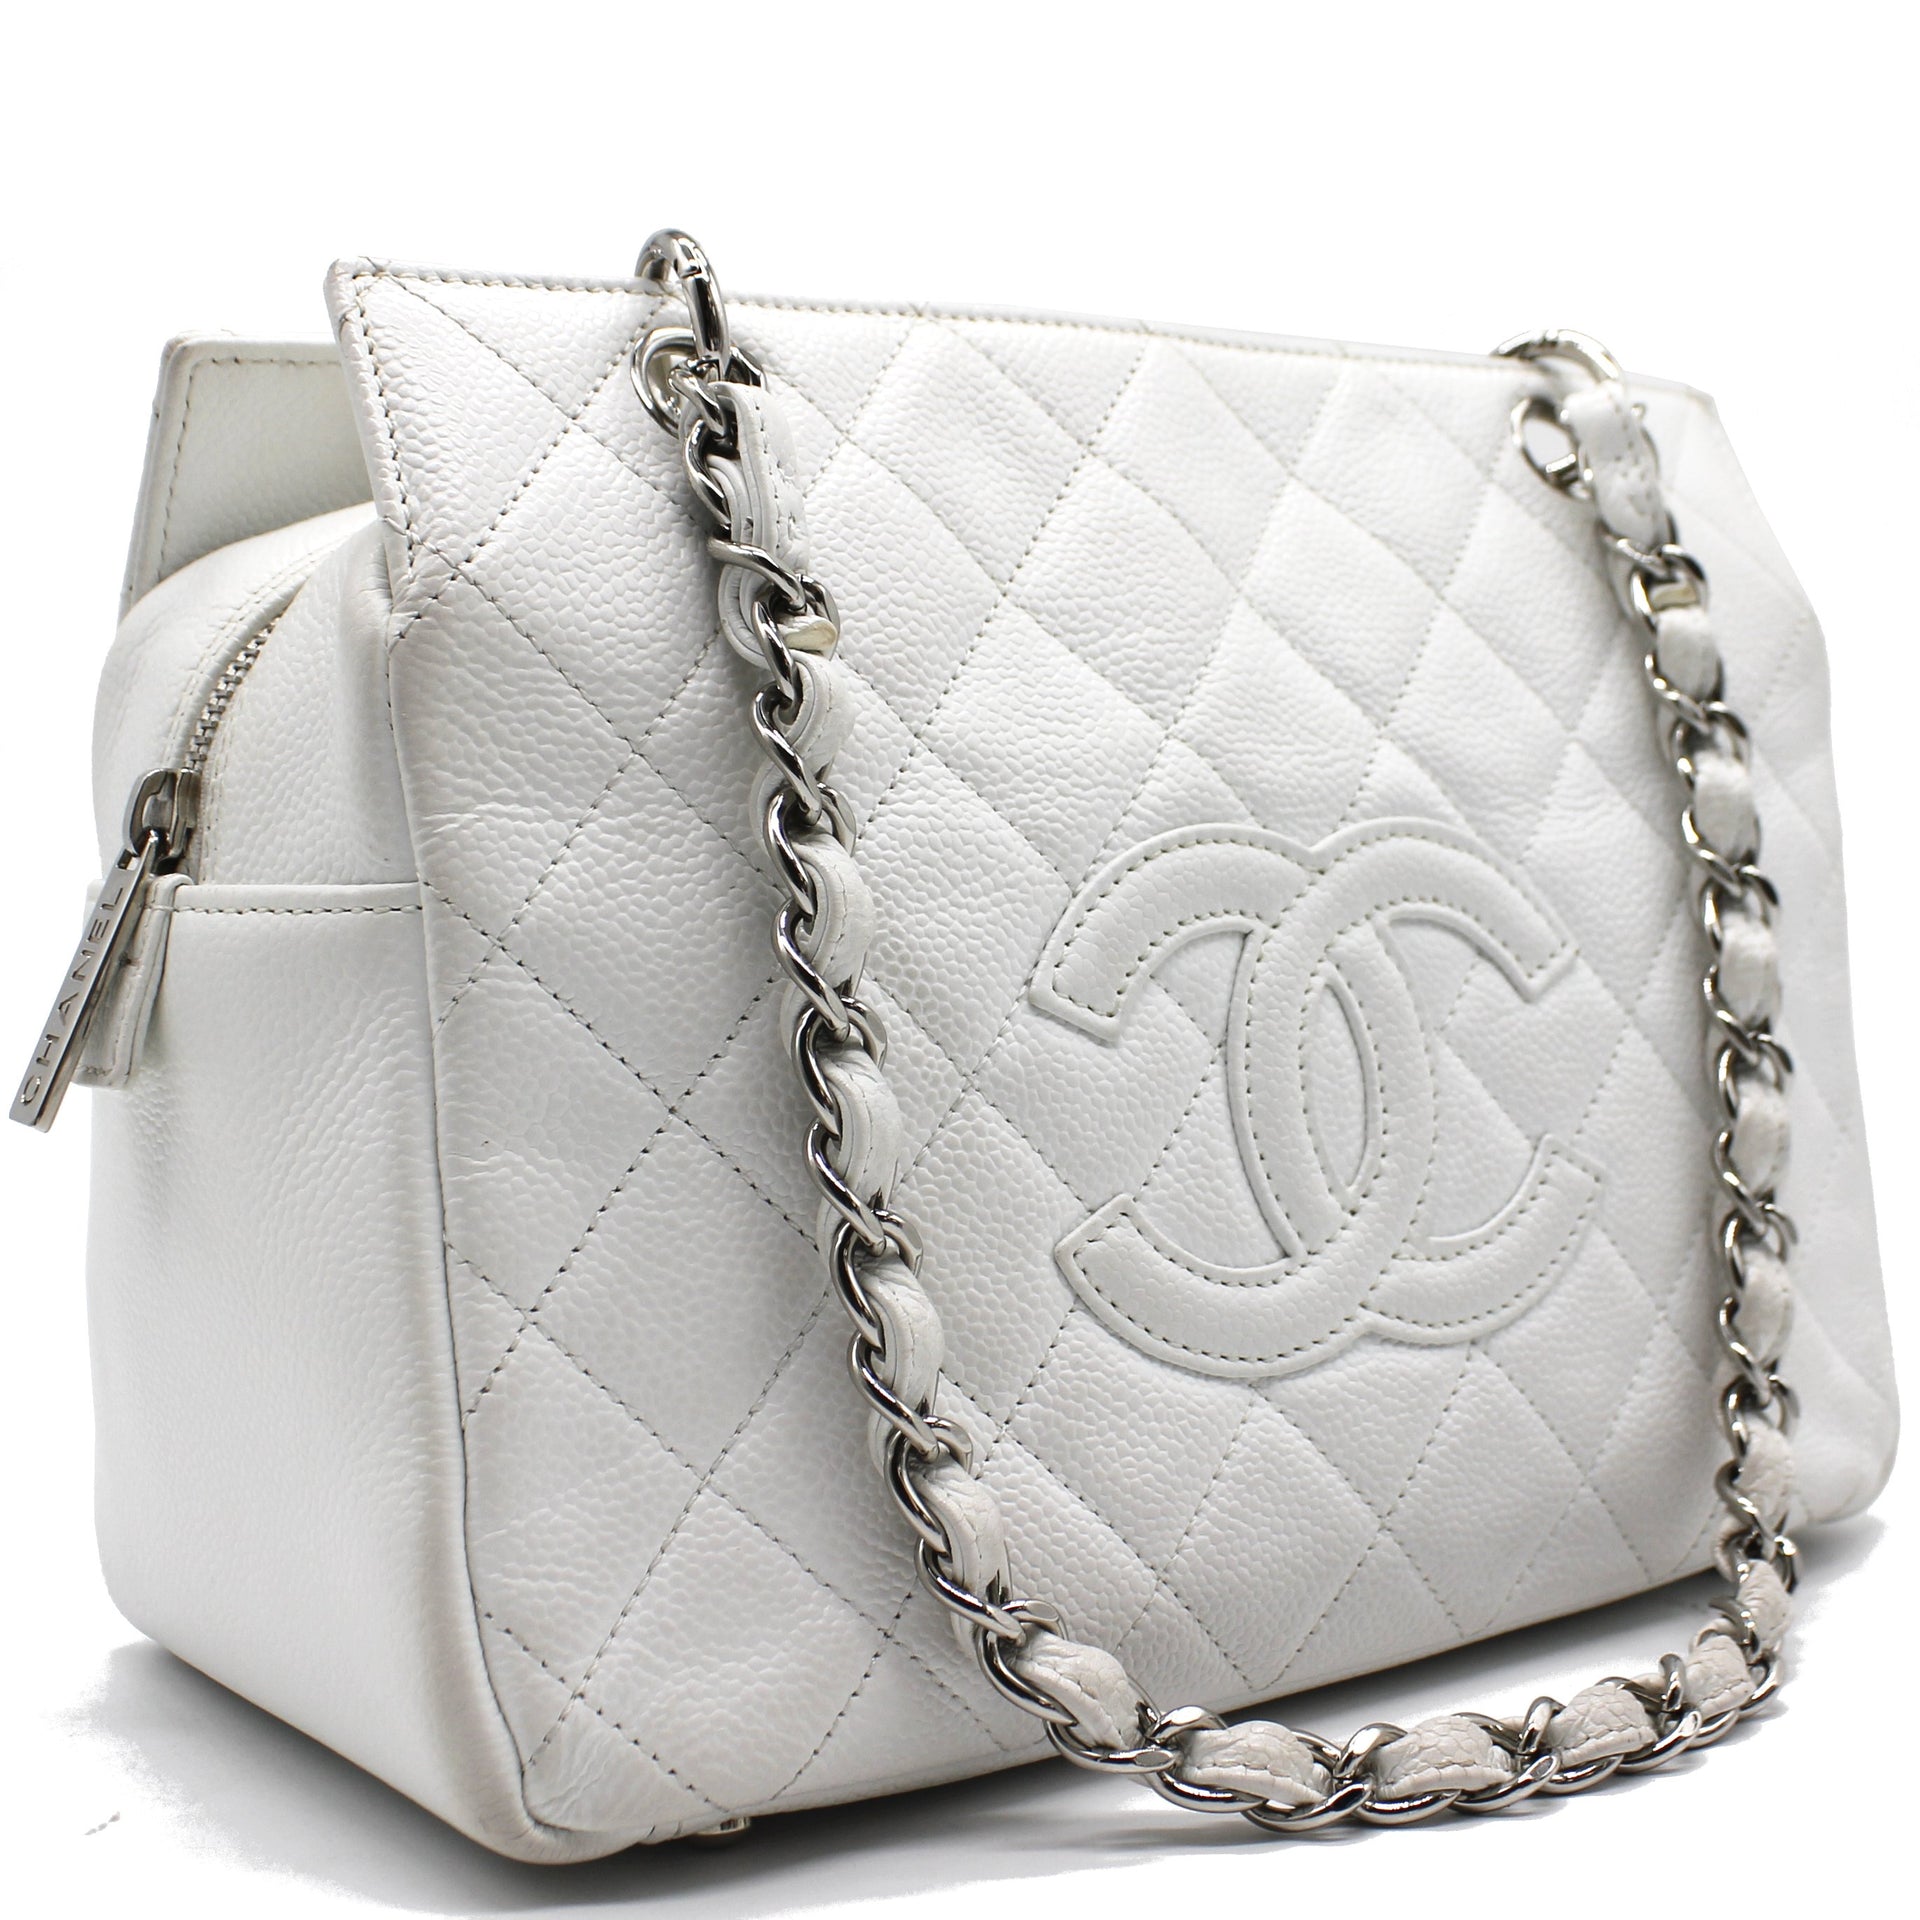 Chanel White Caviar Leather Petit CC Timeless Tote Bag Chanel